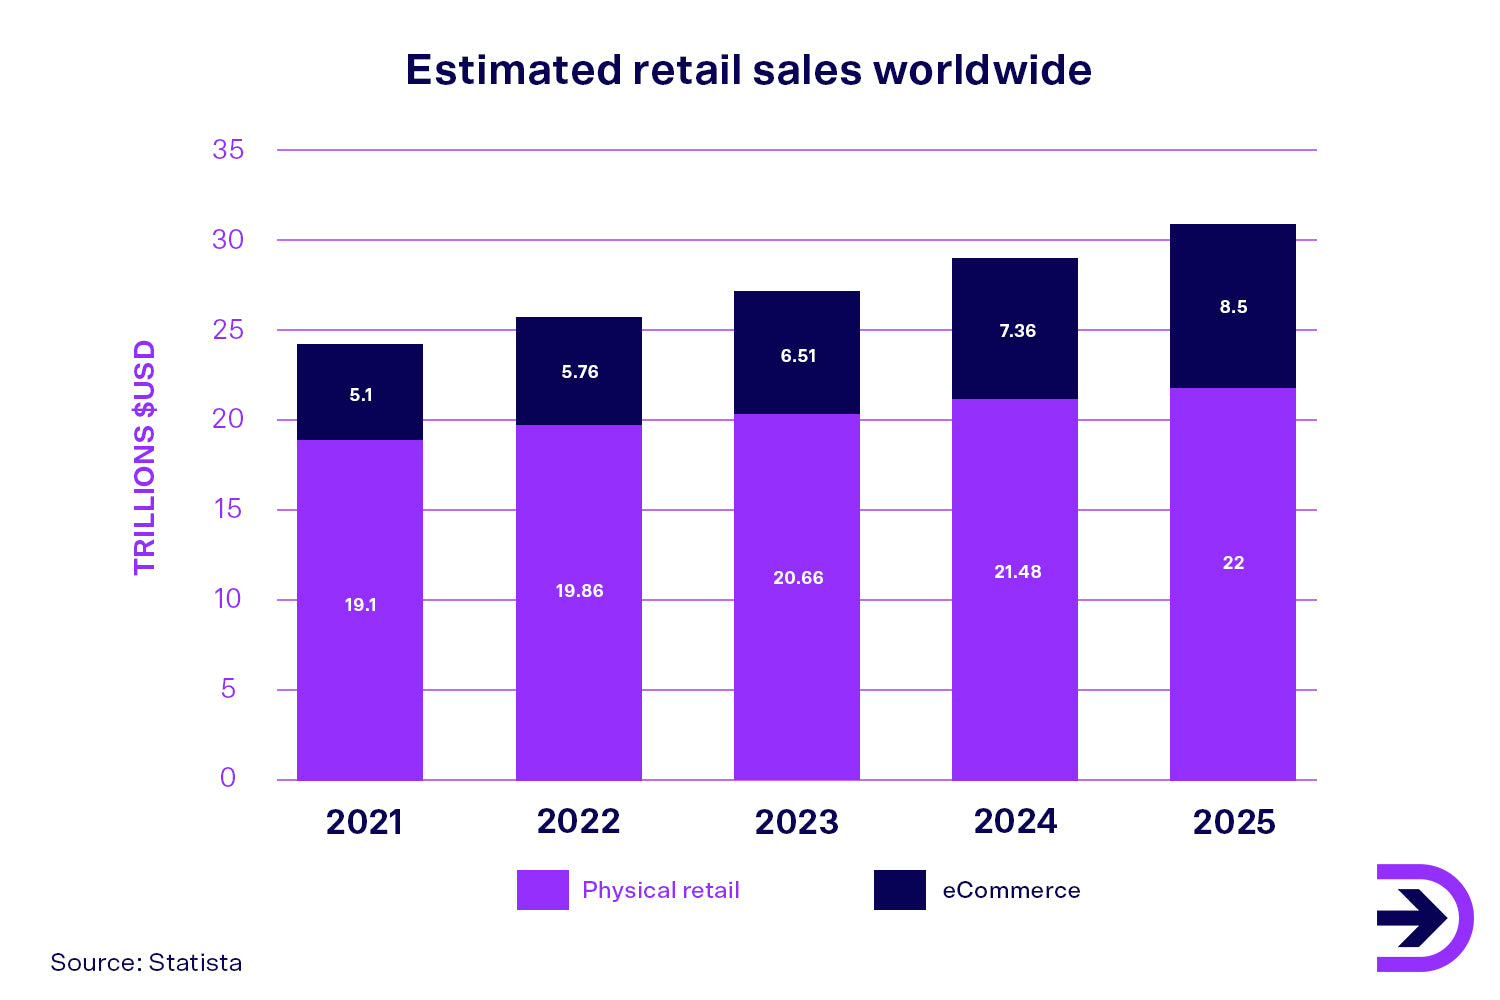 Worldwide retail sales across physical and ecommerce stores is growing every year, with 2023 estimated to reach $6.51 trillion. 